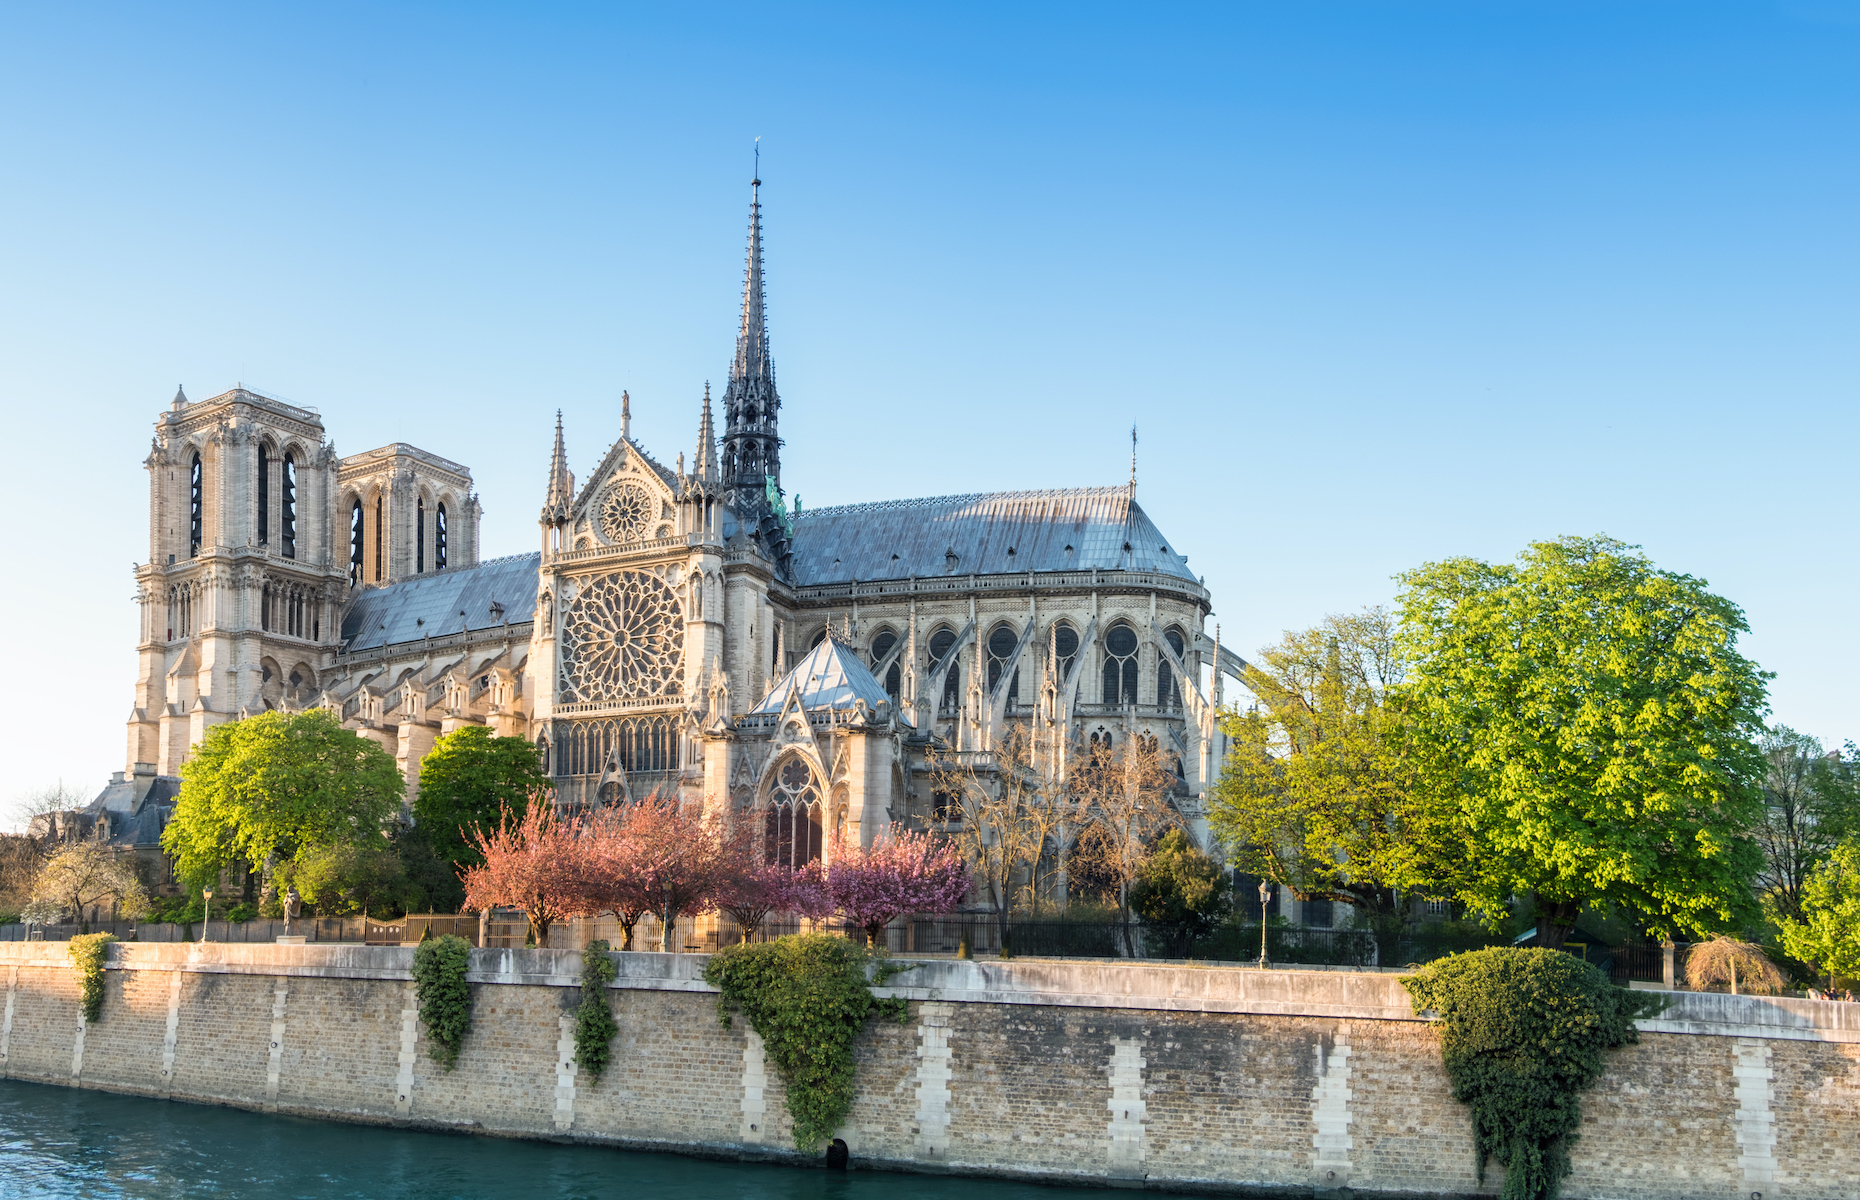 <p>This medieval cathedral, immortalized by Victor Hugo, suffered a major fire in April 2019. The church and its immediate surroundings were then <a href="https://www.britannica.com/topic/Notre-Dame-de-Paris" rel="noreferrer noopener">closed to the public</a> as restoration work began. Prior to the fire, this jewel of Gothic art, located on the Île de la Cité, received <a href="https://www.eutouring.com/facts_notre_dame_cathedral.html" rel="noreferrer noopener">13 million annual visitors</a> and up to 50,000 per day during major Catholic holidays, making it <a href="https://www.news18.com/news/lifestyle/notre-dame-cathedral-in-paris-tops-list-of-most-visited-monuments-once-again-1778075.html" rel="noreferrer noopener">Europe’s most visited monument</a>. Notre-Dame de Paris has actually undergone <a href="https://www.britannica.com/topic/Notre-Dame-de-Paris" rel="noreferrer noopener">major restorations</a> since the 19th century.</p>